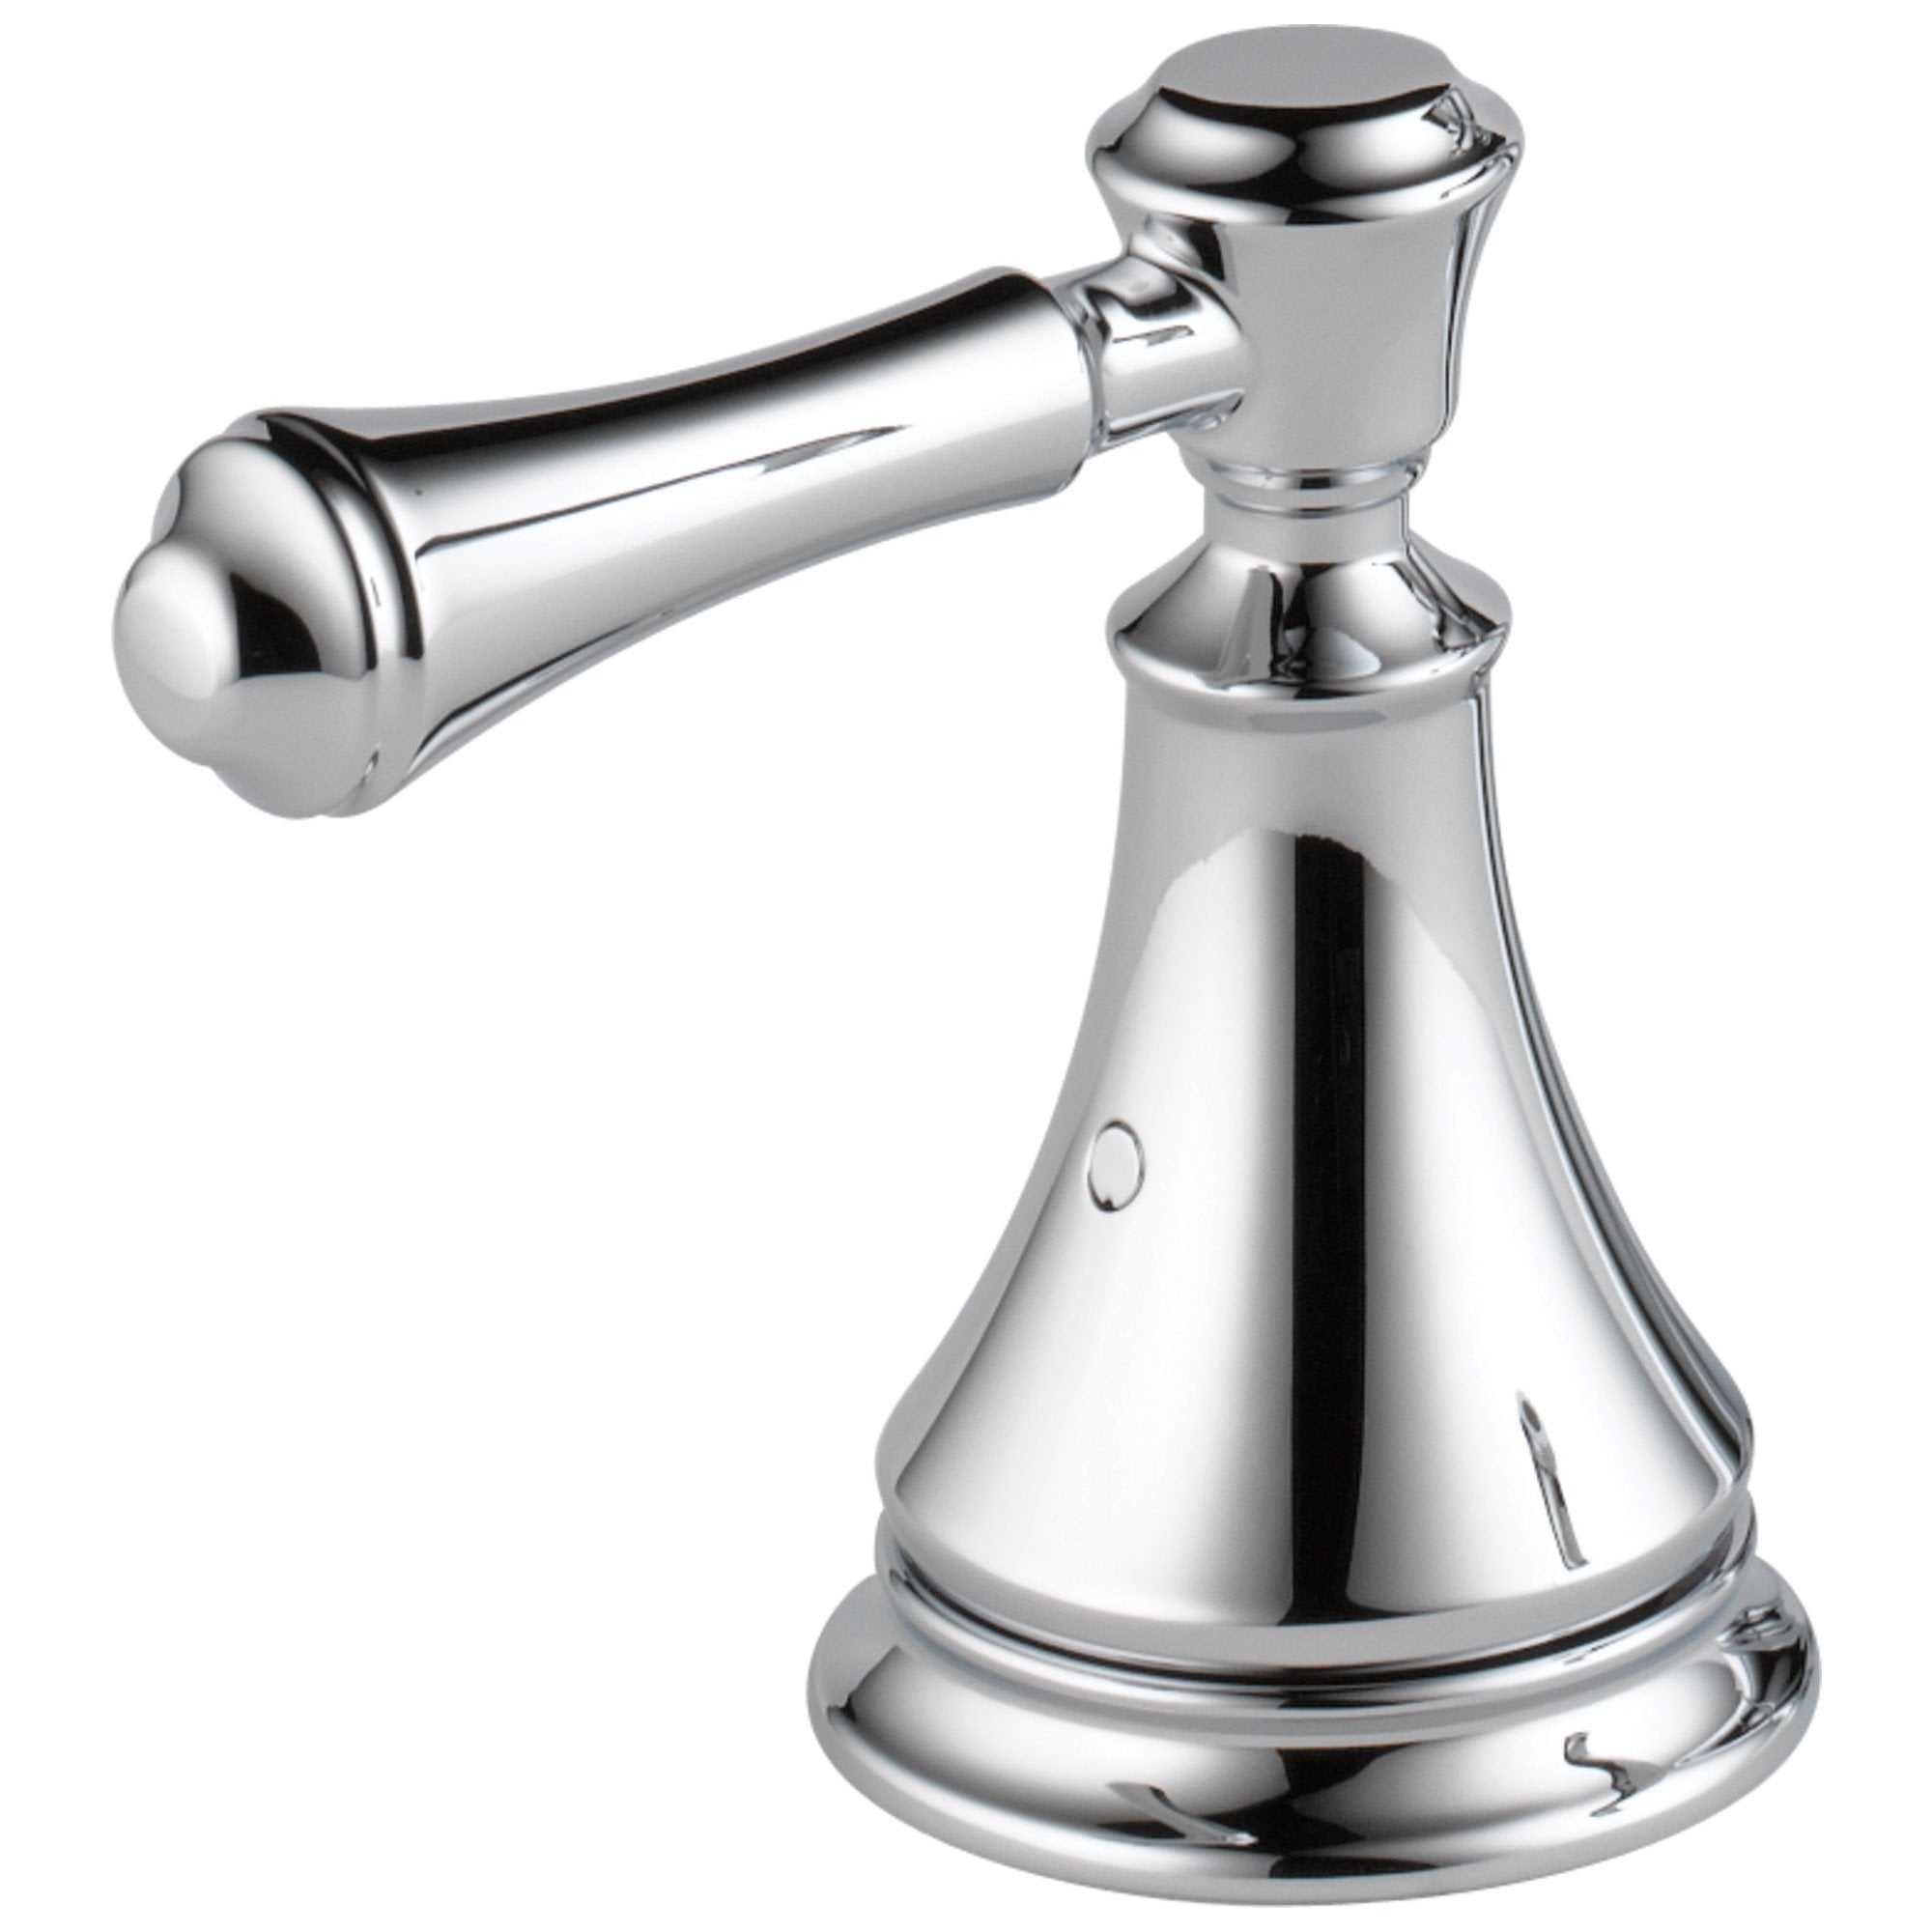 Delta Cassidy Collection Chrome Finish Roman Tub Lever Handles - Quantity 2 Included 579648